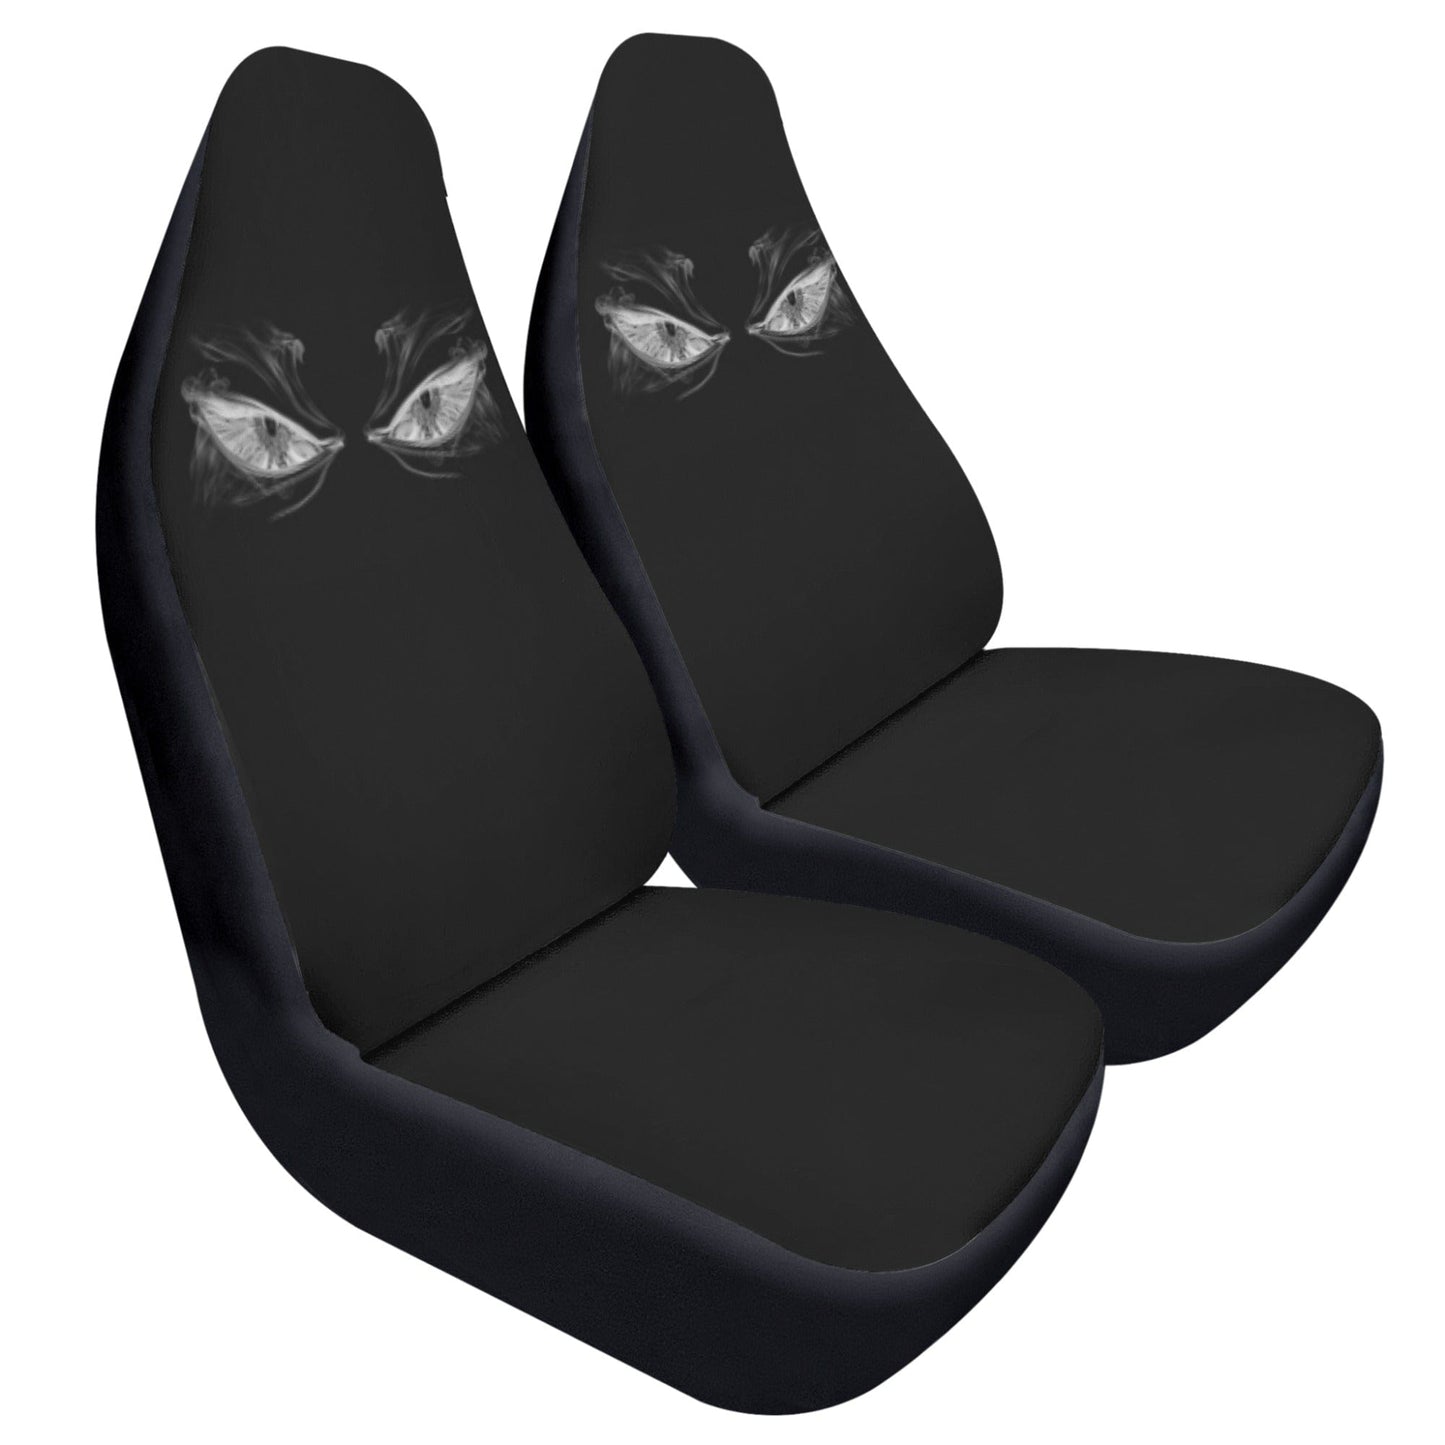 Angry Eyes 2PC Car Seat Covers car seat covers Pioneer Kitty Market 47.5cm X 49.5cm X 79.5cm  